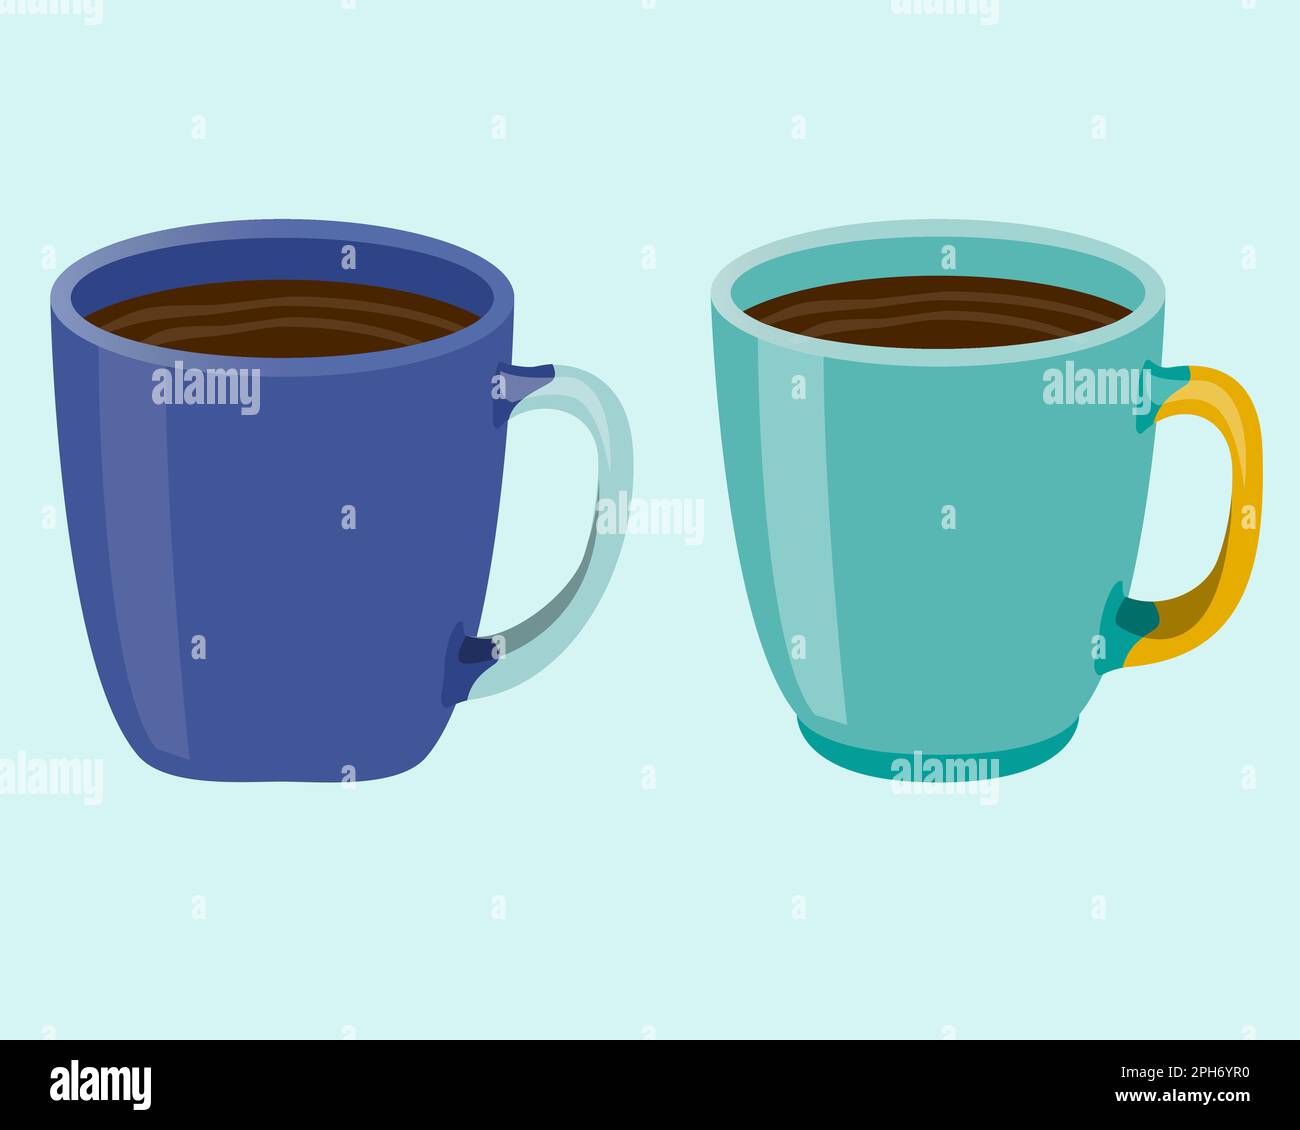 Cup of tea blue and turquoise SET in realistic style. Porcelain mug with hot cofee. Colorful vector illustration isolated on white background. Stock Vector